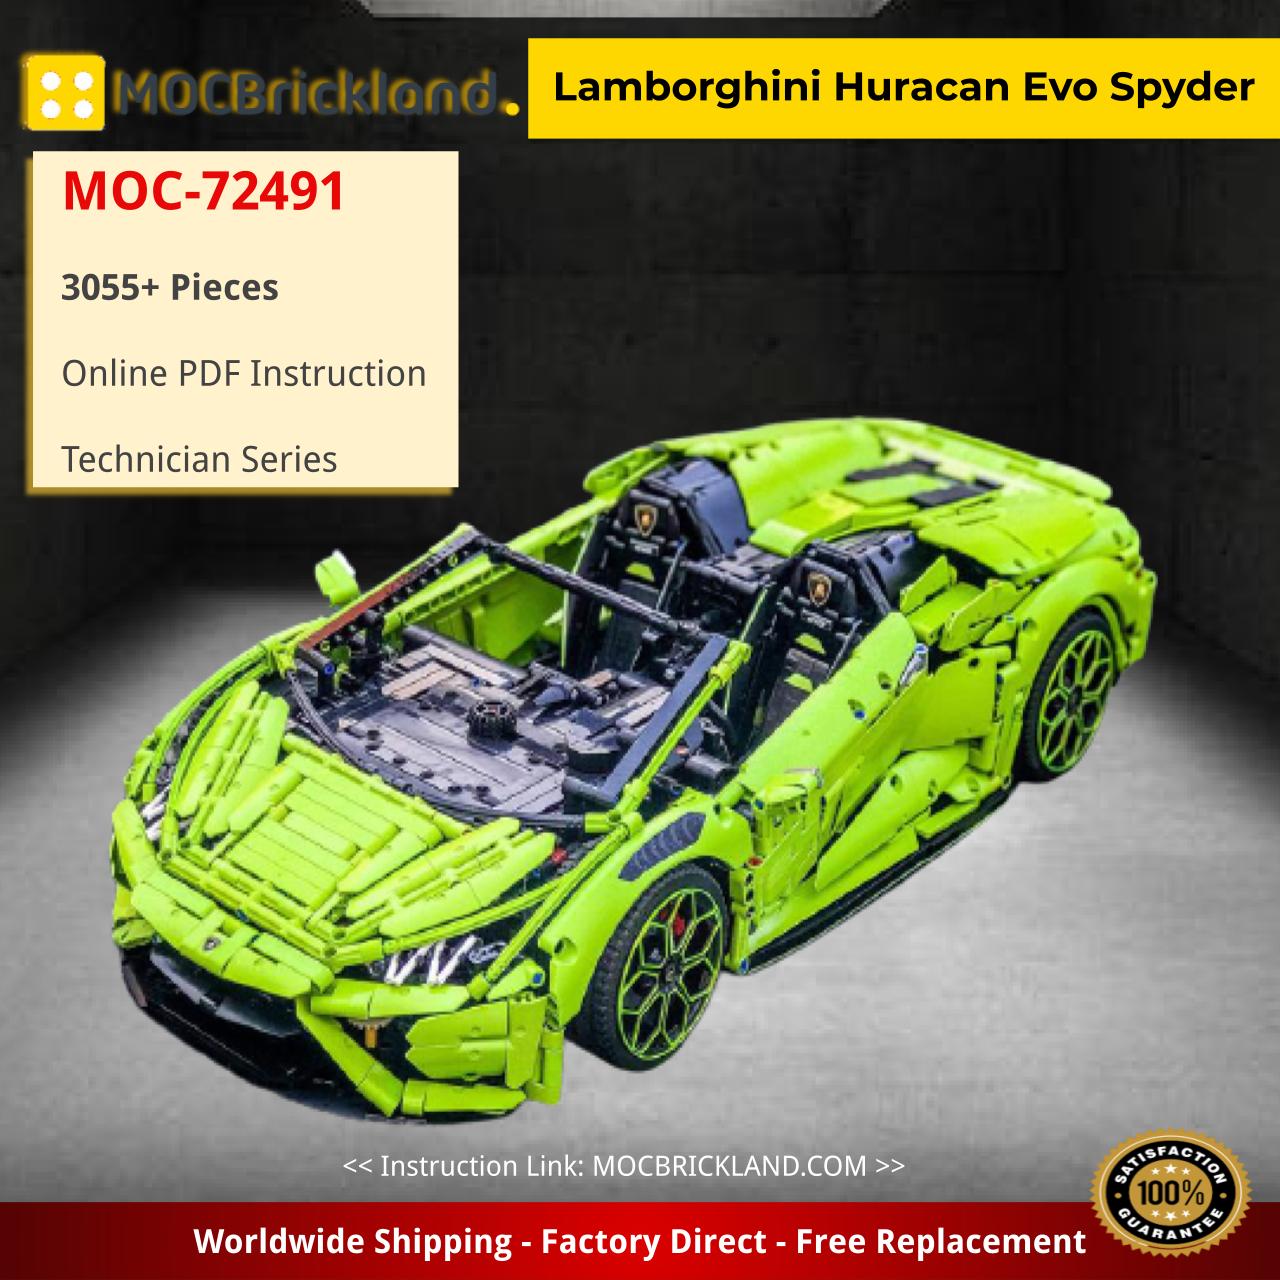 Lamborghini Huracan Evo Spyder Technic MOC-72491 by Loxlego with 3055 pieces